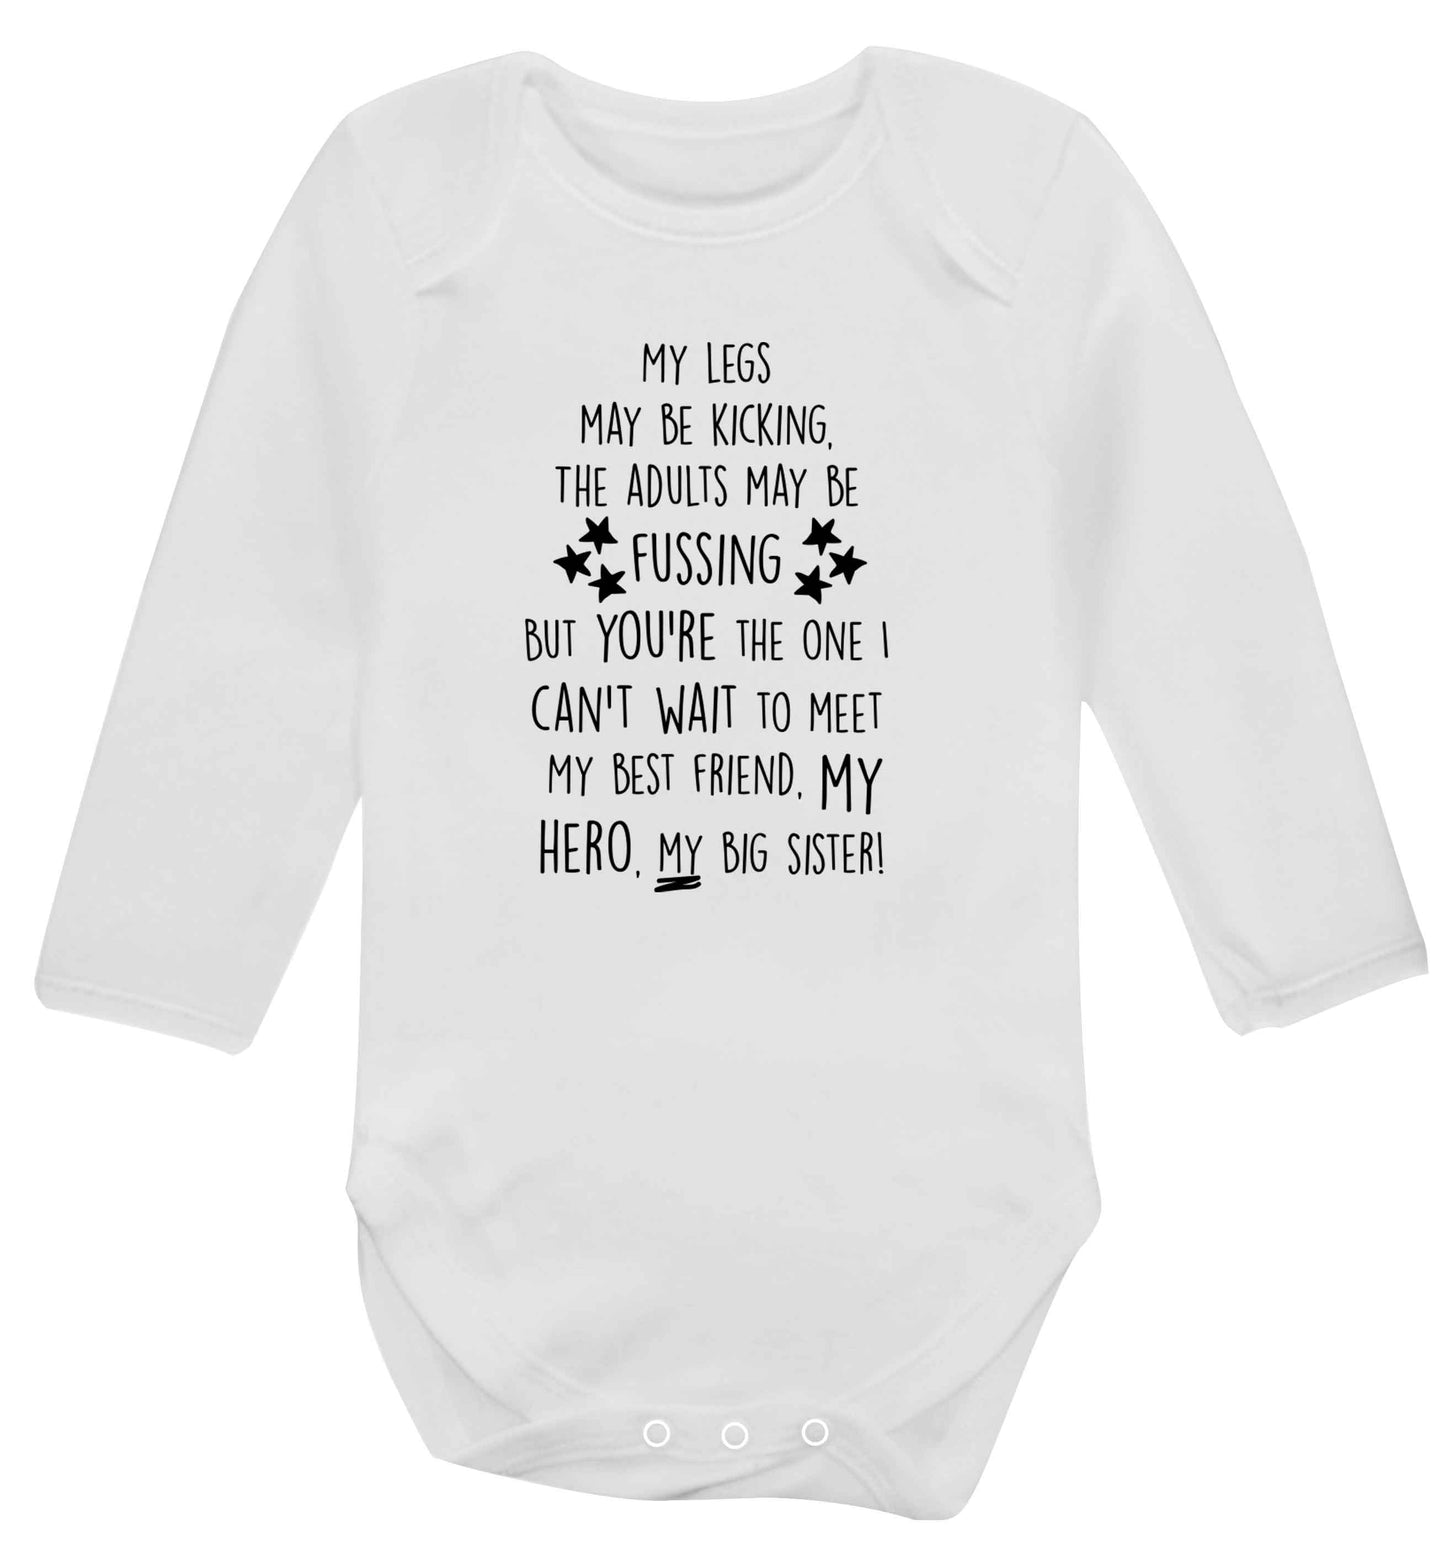 A poem from bump to big sister Baby Vest long sleeved white 6-12 months